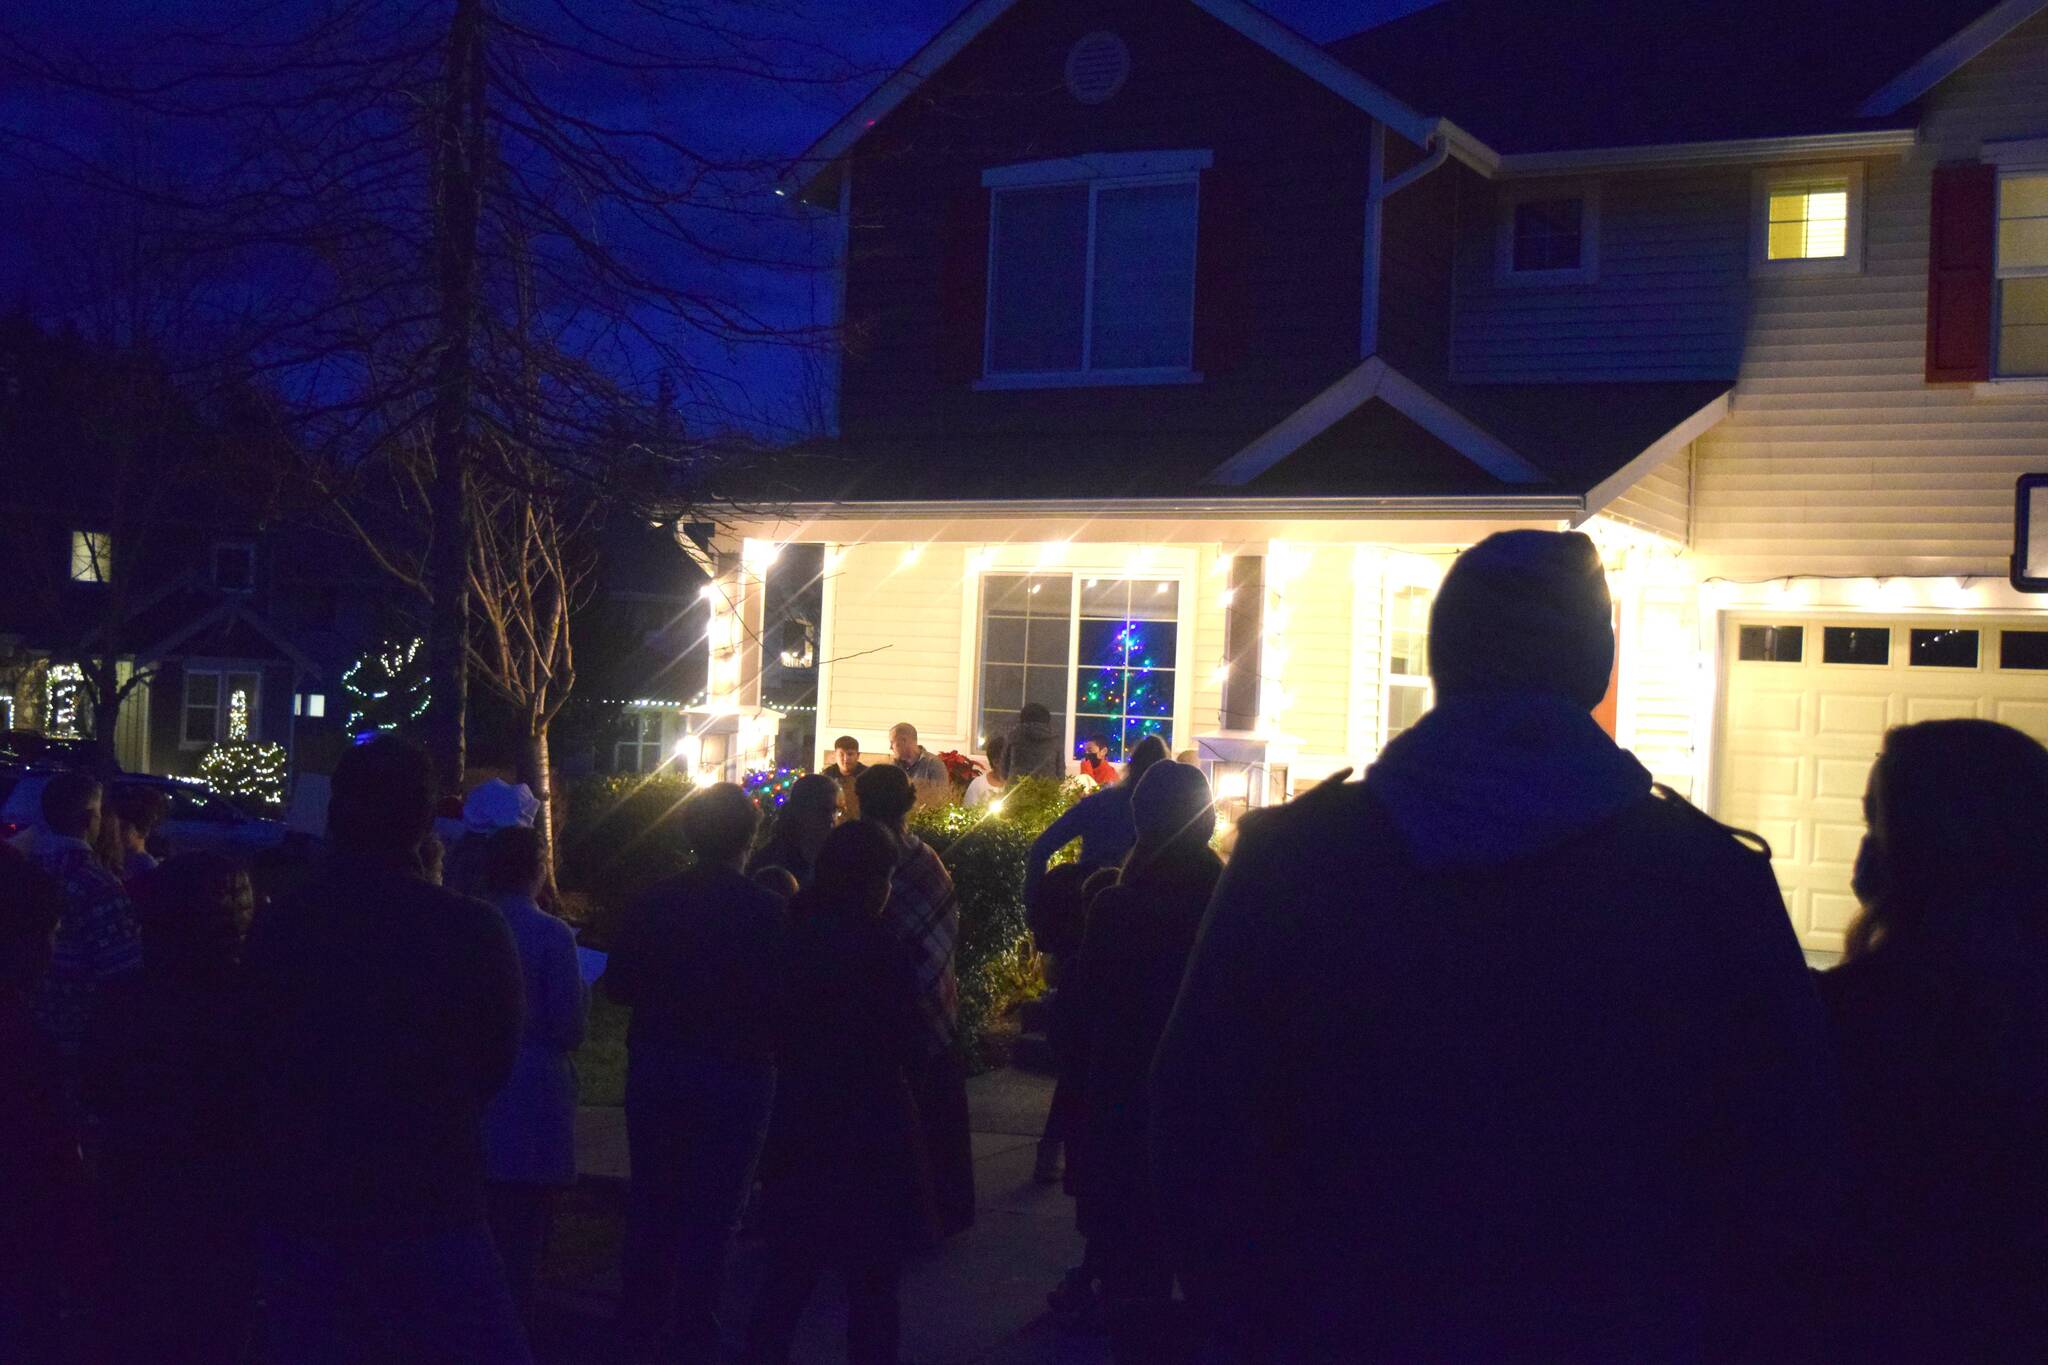 Dozens of christmas carolers, led by Valley Center Stage, show their support for Zander Wainhouse and his family by singing outside their house in Snoqualmie on Nov. 29. Zander was diagnosed with Medulloblastoma, an aggressive pediatric brain cancer, in Dec. 2020. Zander’s Mom, Angelina, said her son became too sick to travel a week before he was planning on taking his Make-A-Wish trip. Zander has asked that the $5,000 for his trip be donated to the Snoqualmie Valley Homeless Shelter and Food Bank.
To donate to the Wainhouse family, visit: bit.ly/3d4Gr5H.
Photo by Conor Wilson/Valley Record.